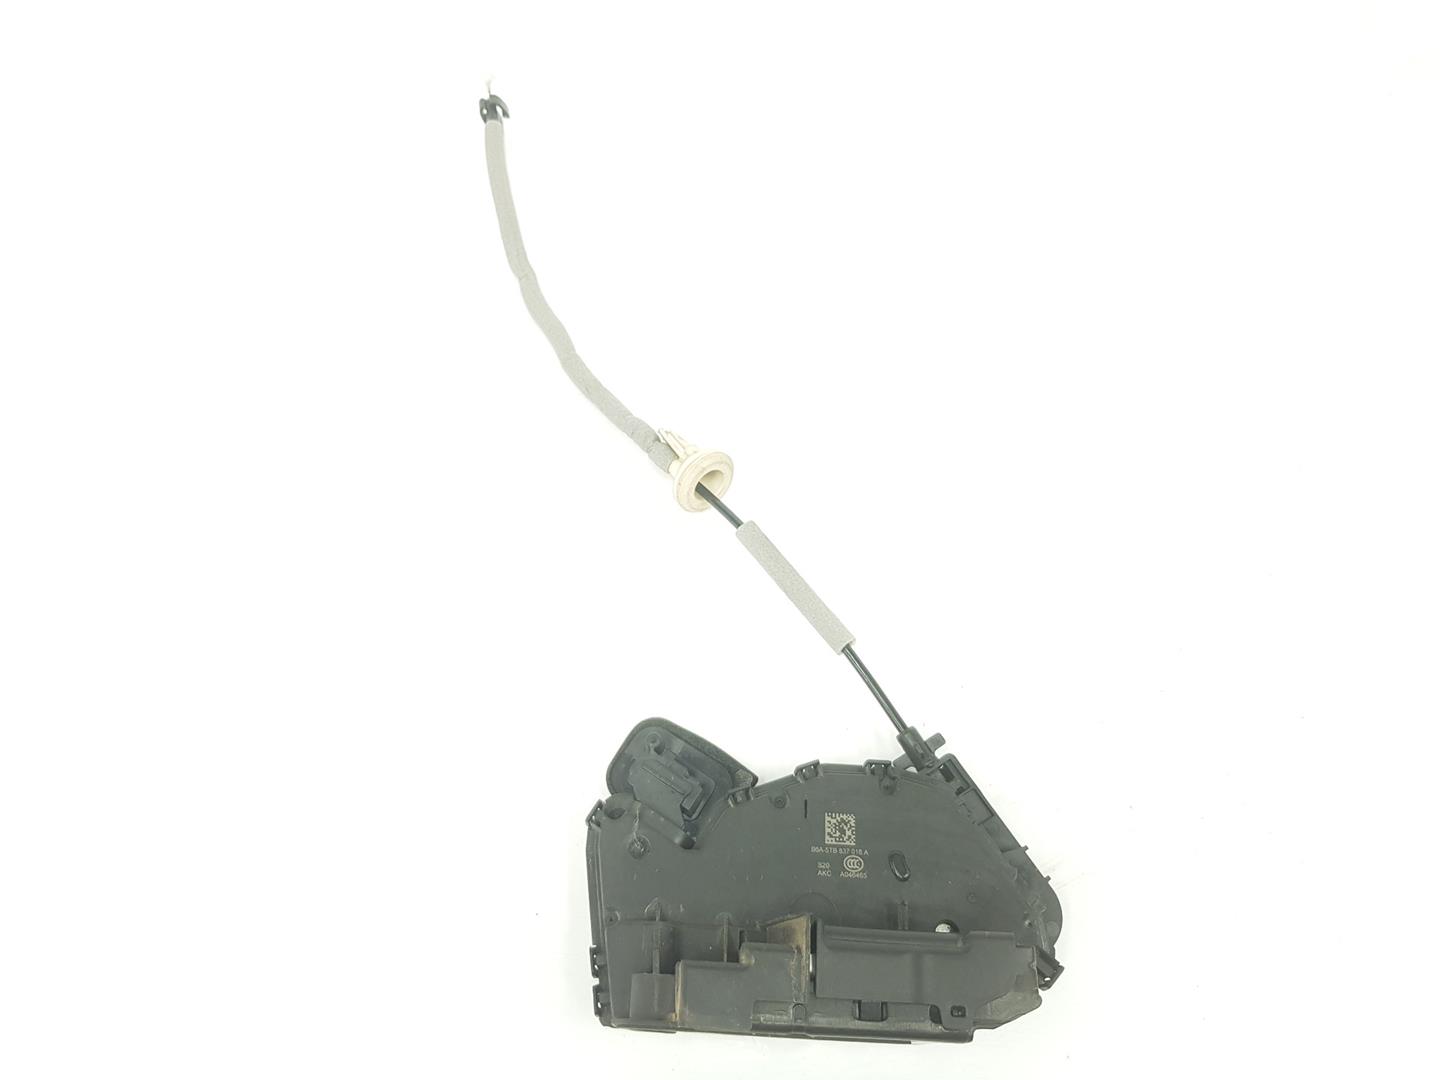 SEAT Alhambra 2 generation (2010-2021) Front Right Door Lock 5TB837016A, 5TB837016A, 1141CB 21694071